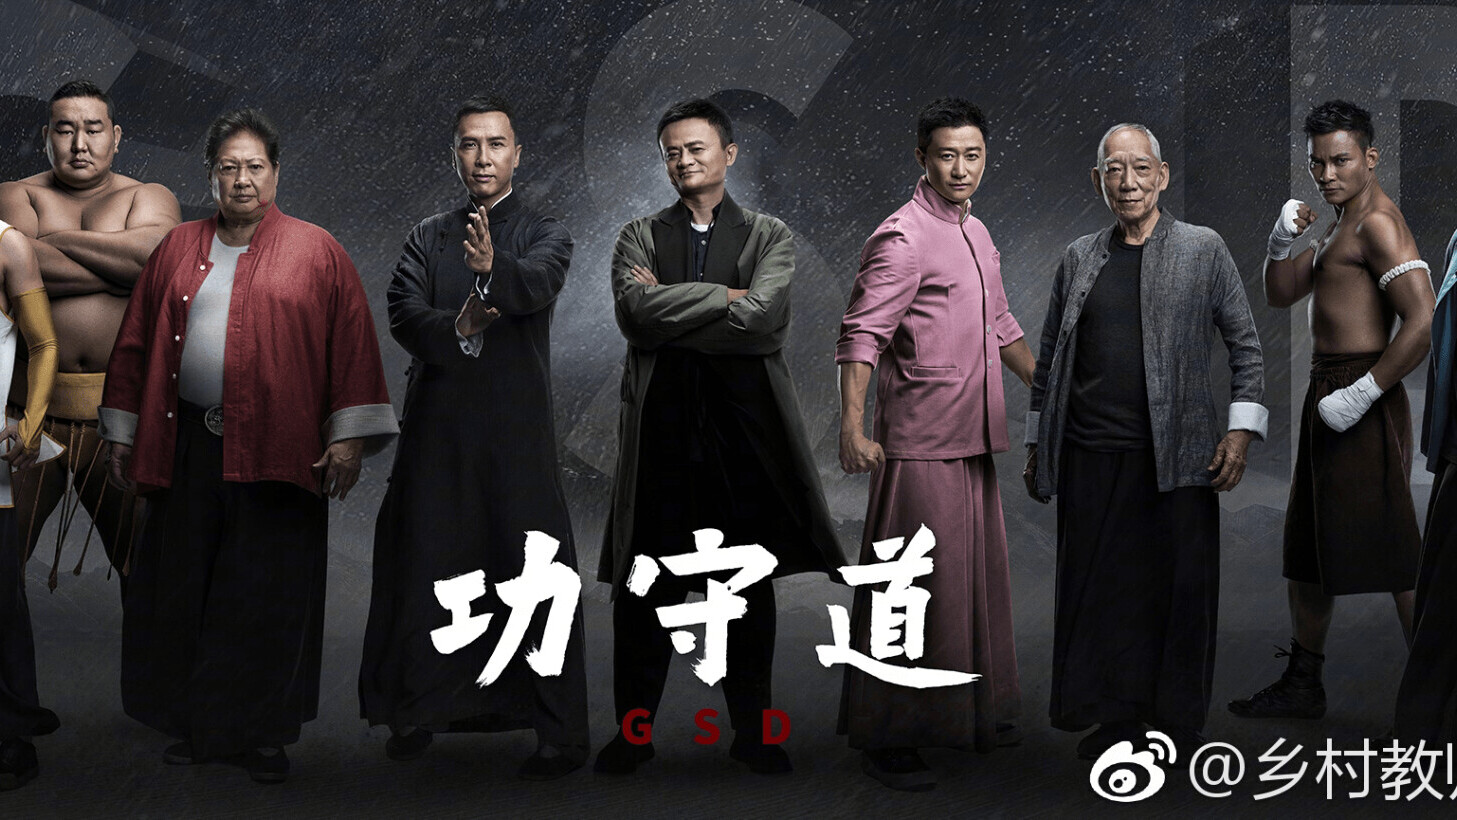 Alibaba’s Jack Ma stars in kung fu movie because he’s awesome